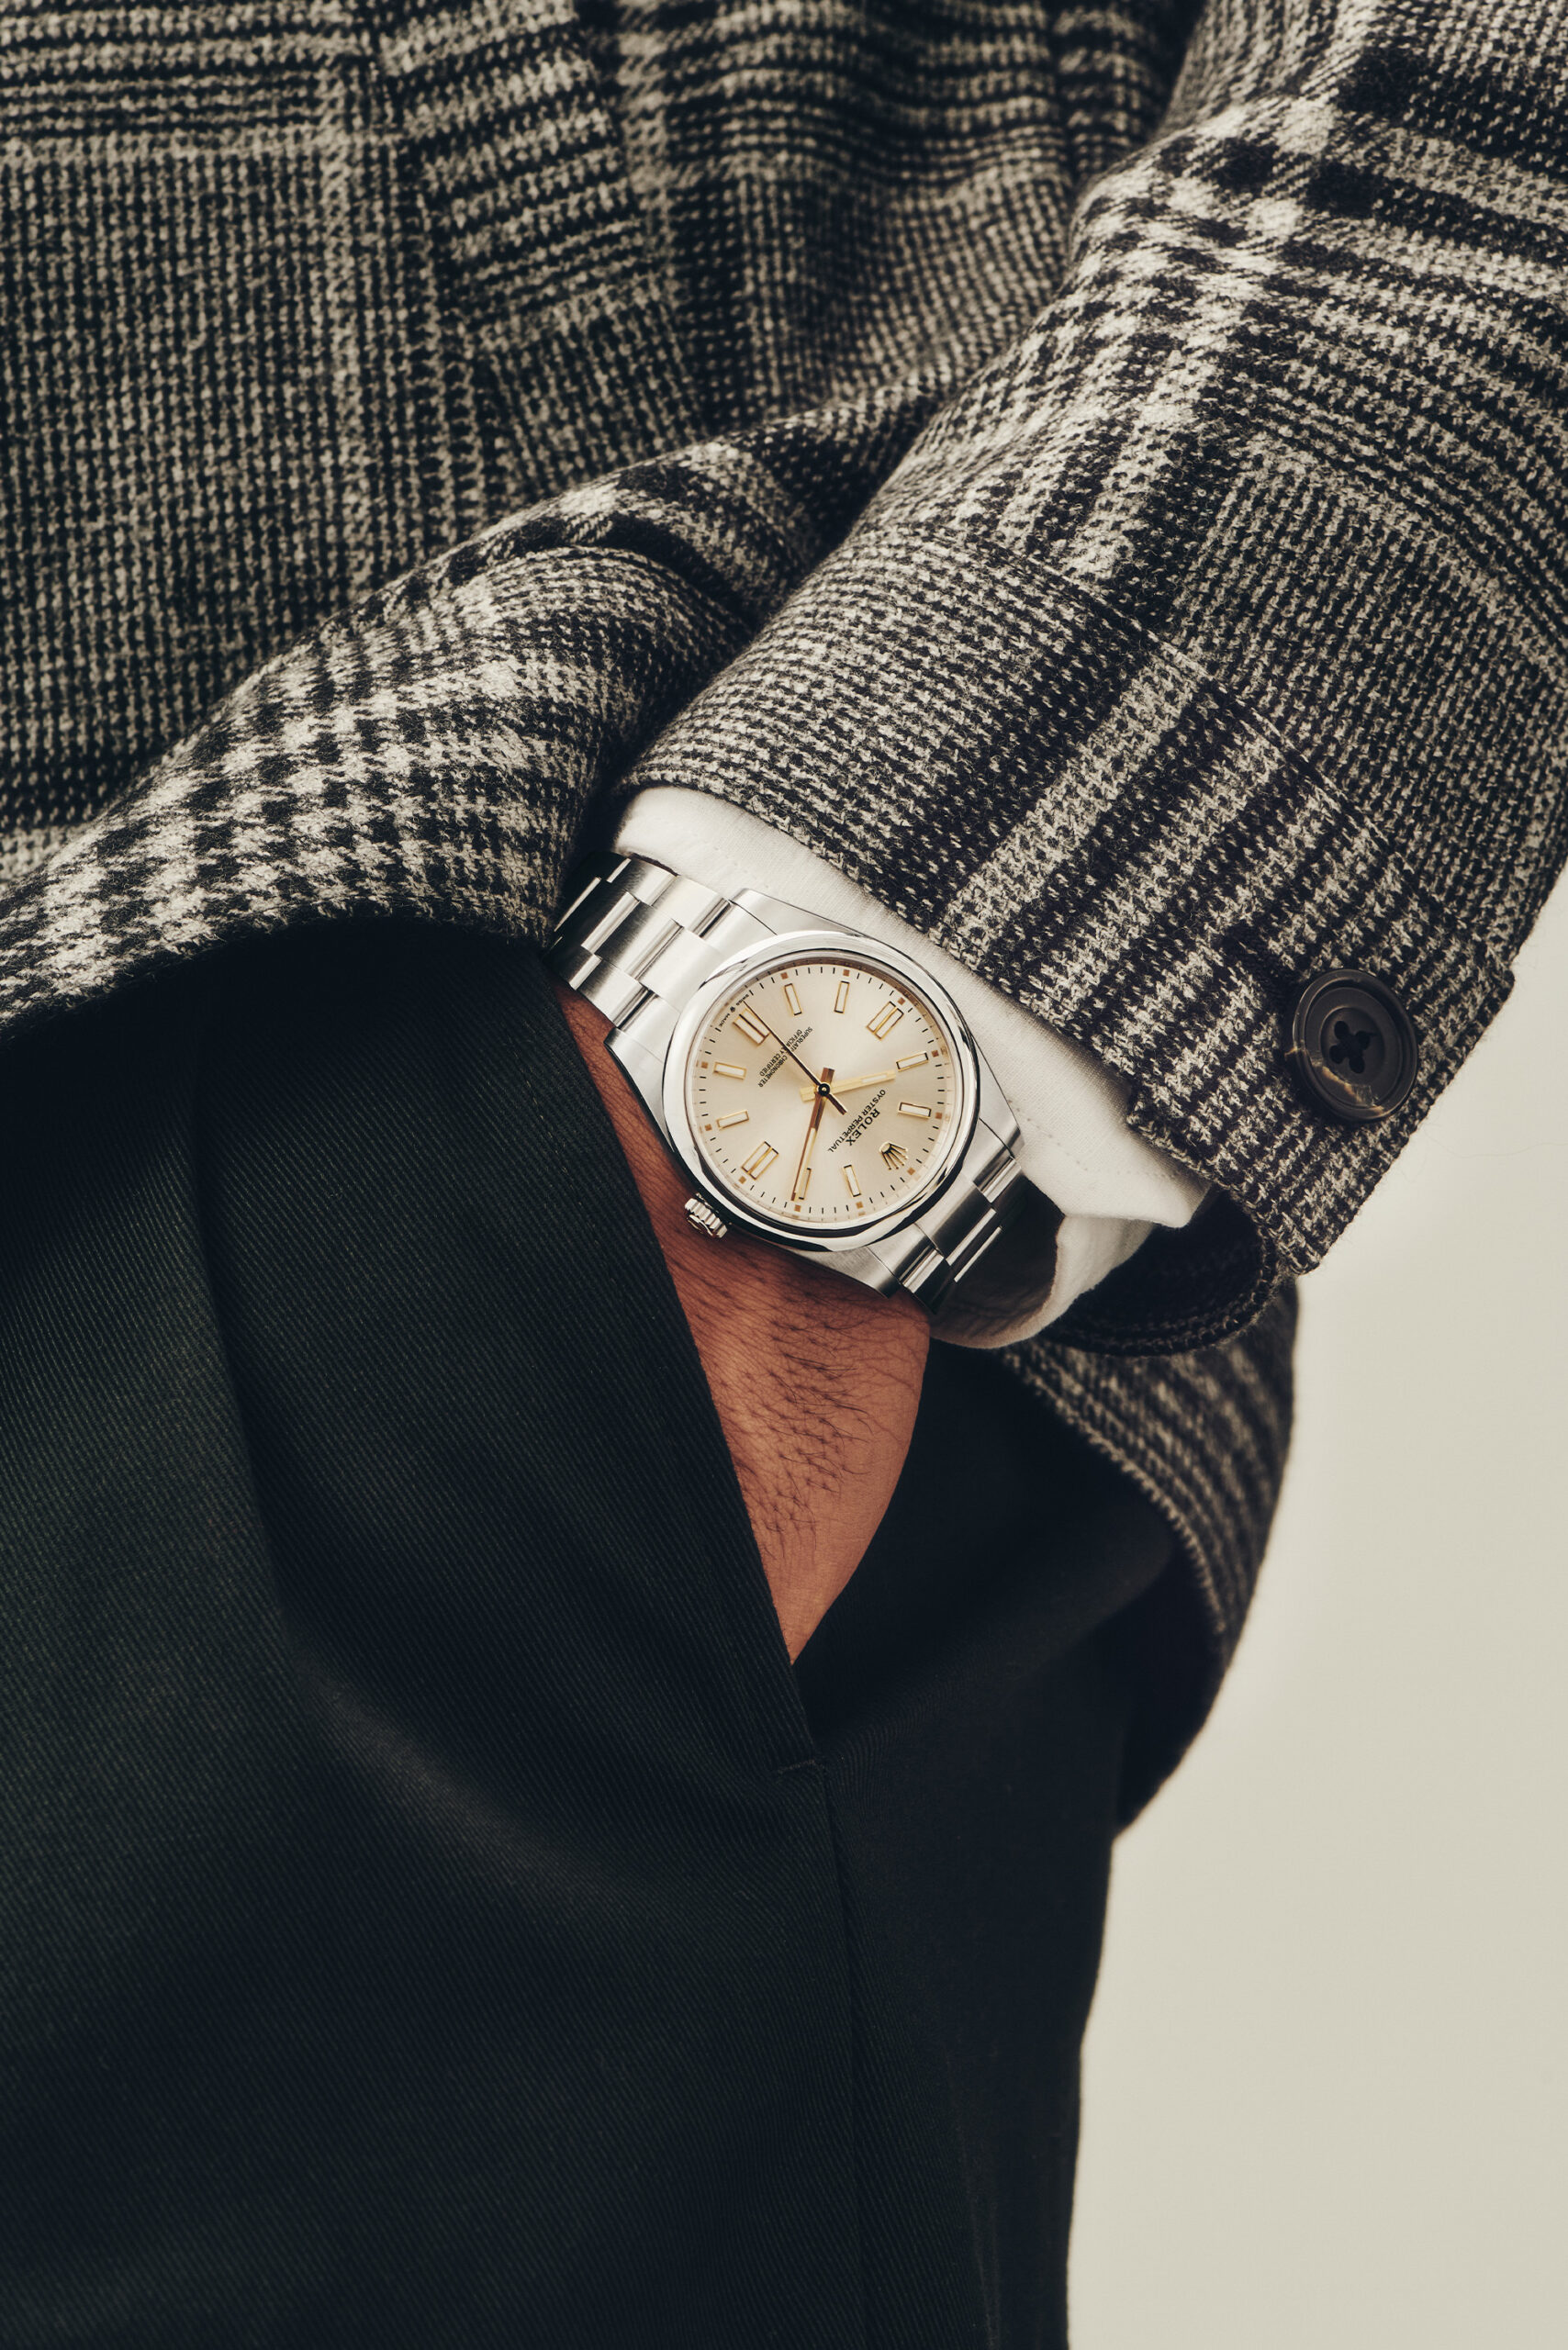 ROLEX OYSTER PERPETUAL 41, $7,550. JACKET ($905) BY HAROLD, AT HARRY ROSEN; SHIRT ($258) BY JOOP!; PANTS ($1,175) BY HERMÈS.